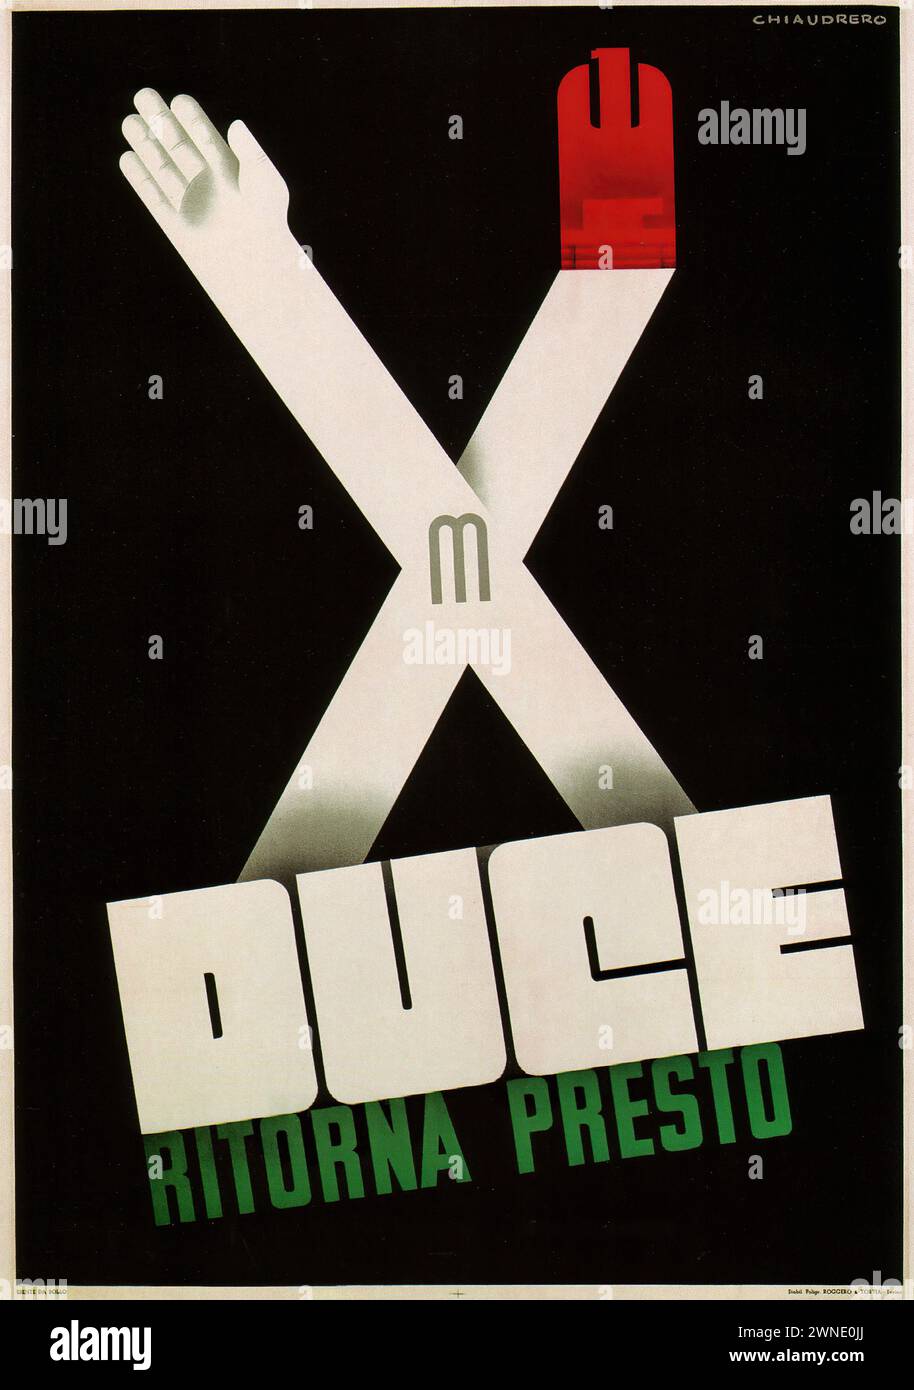 'DUCE RITORNA PRESTO' ['DUCE RETURN SOON'] This stark graphic poster features two hands in a V-shape, one with a Fascist symbol, symbolizing the call for Mussolini's return. The minimalistic design uses the symbolism and colors of Italian fascism and is indicative of the political propaganda of the era. Stock Photo